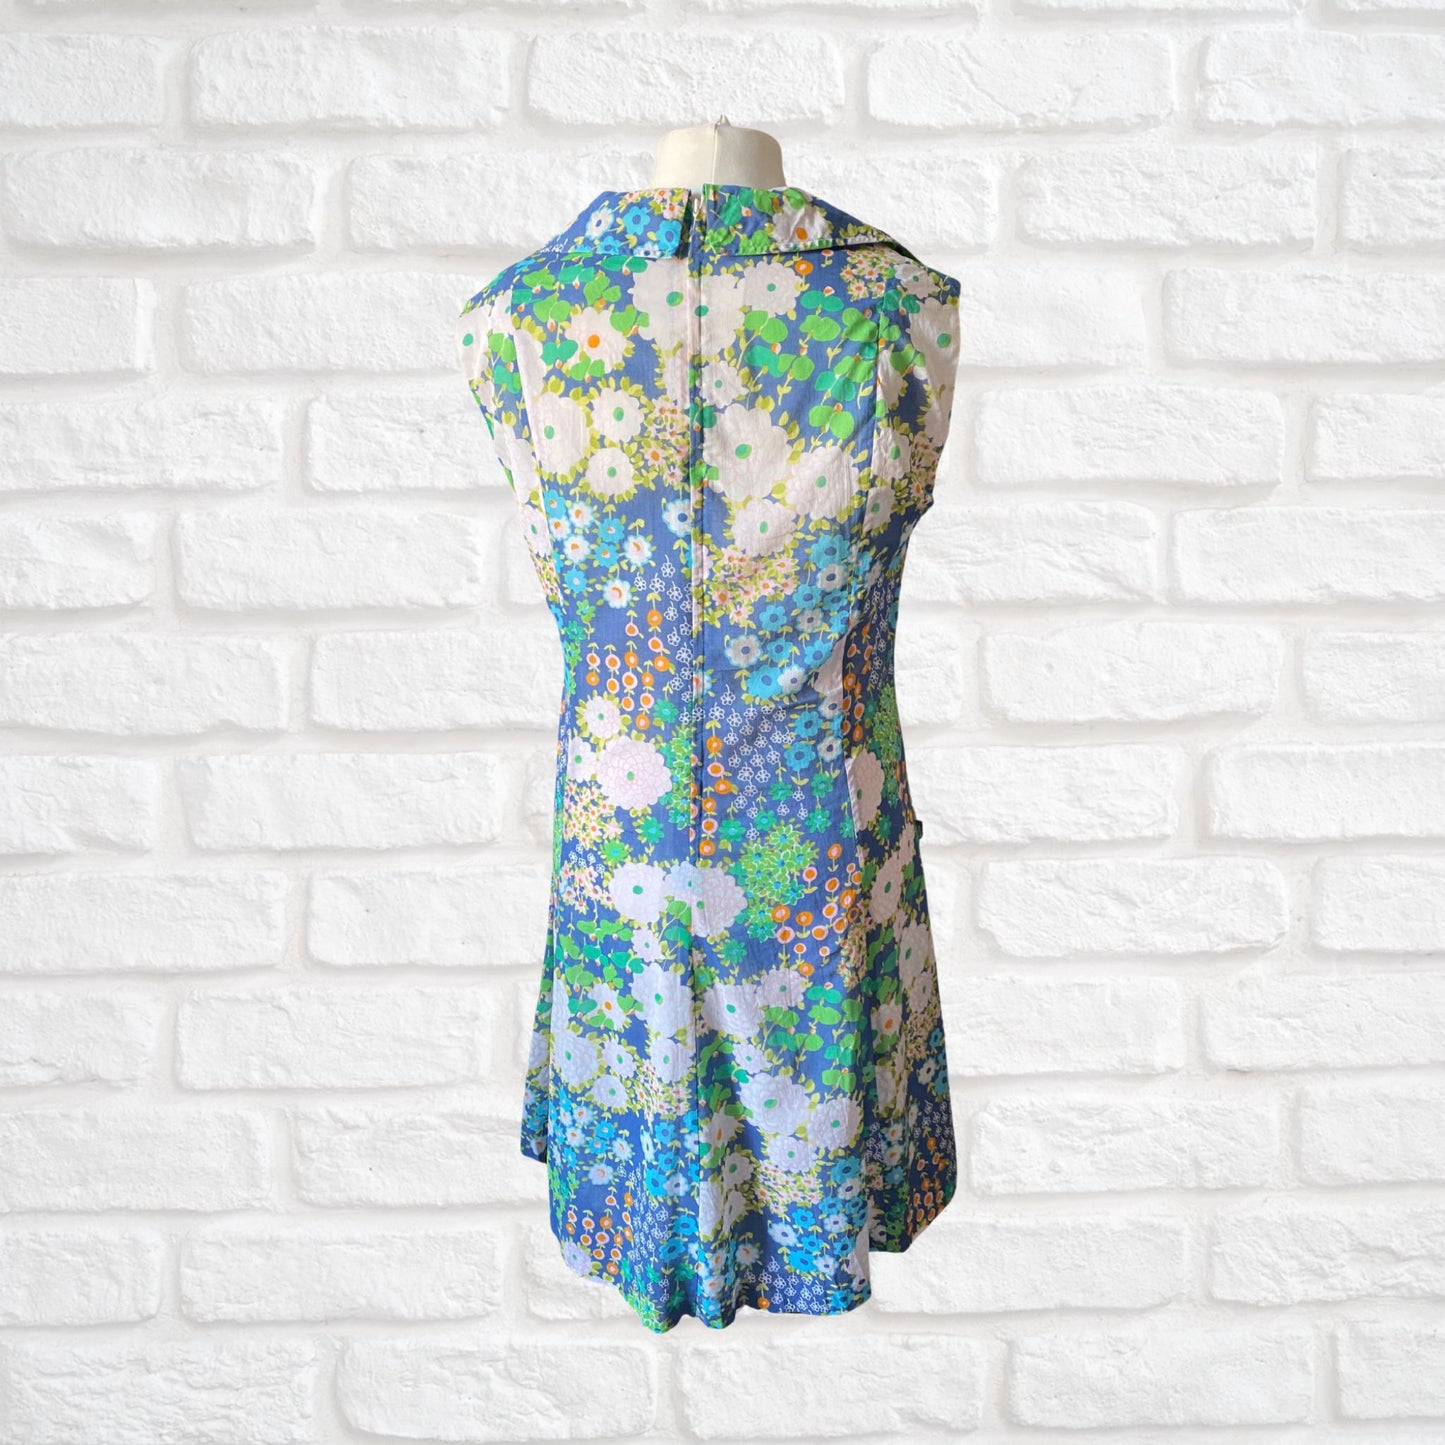 1960s Floral Sleeveless Collared Vintage Summer Dress. Approx UK size 14-16